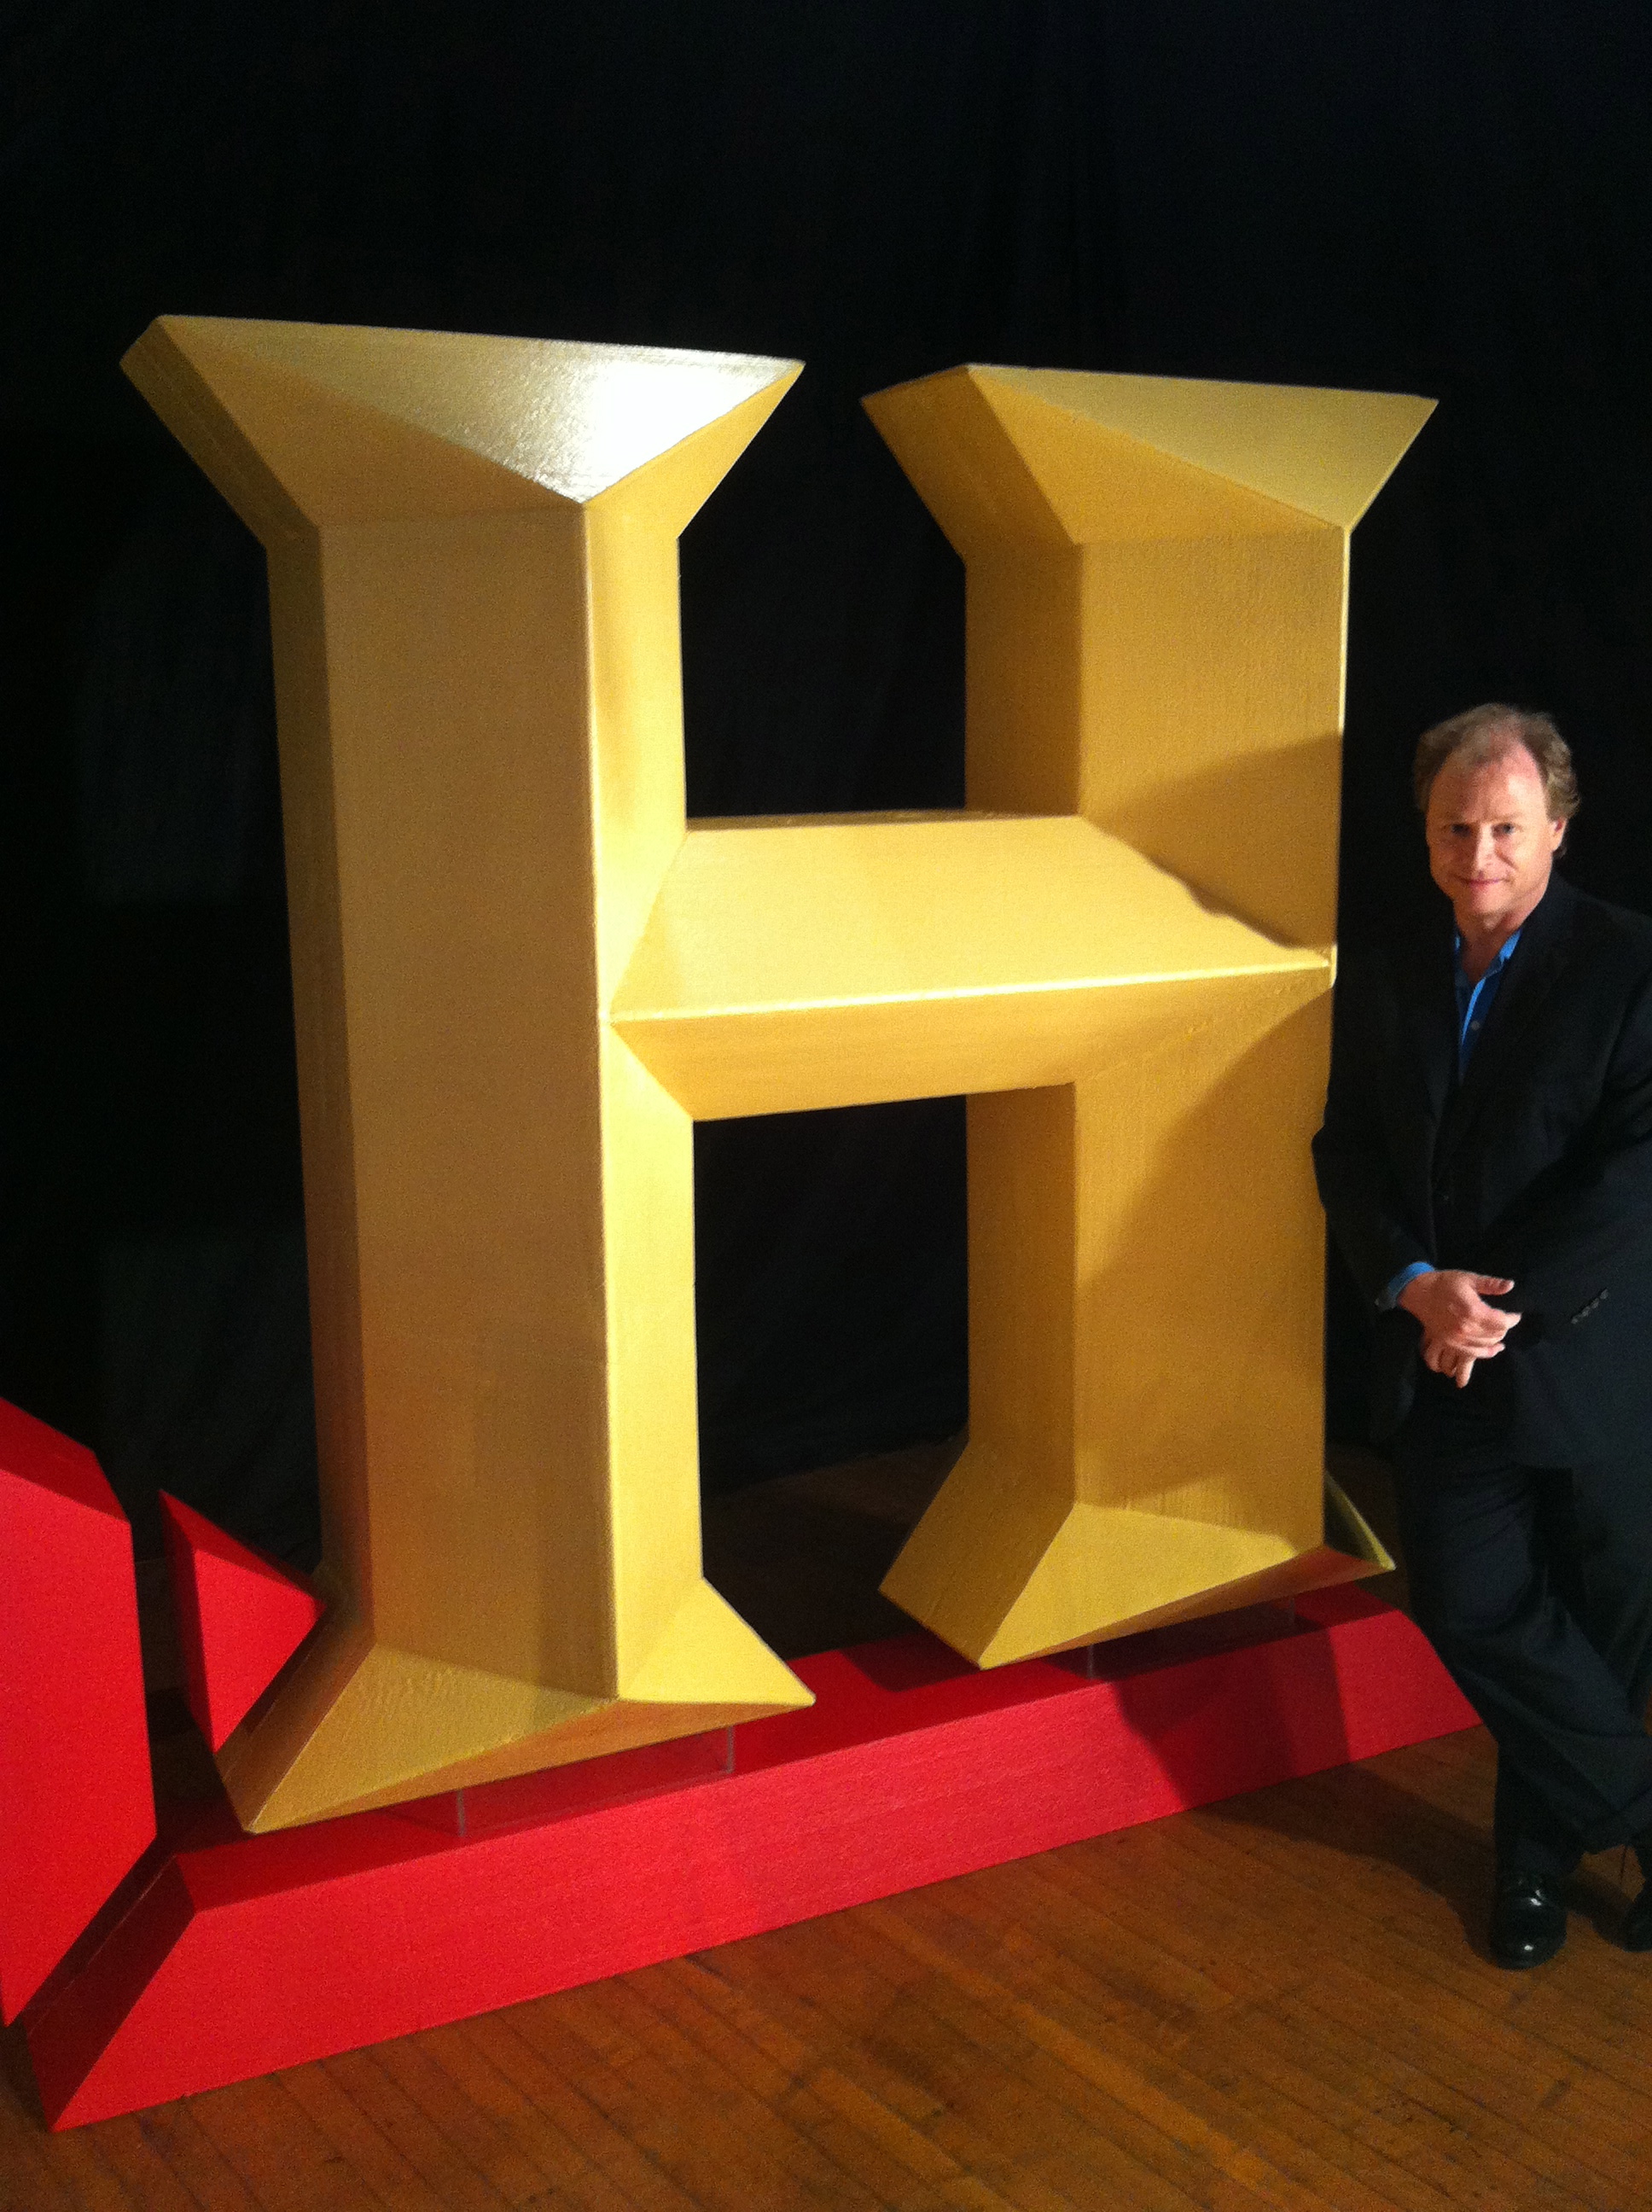 Promo shot from co-hosting the National History Bee for the History Channel